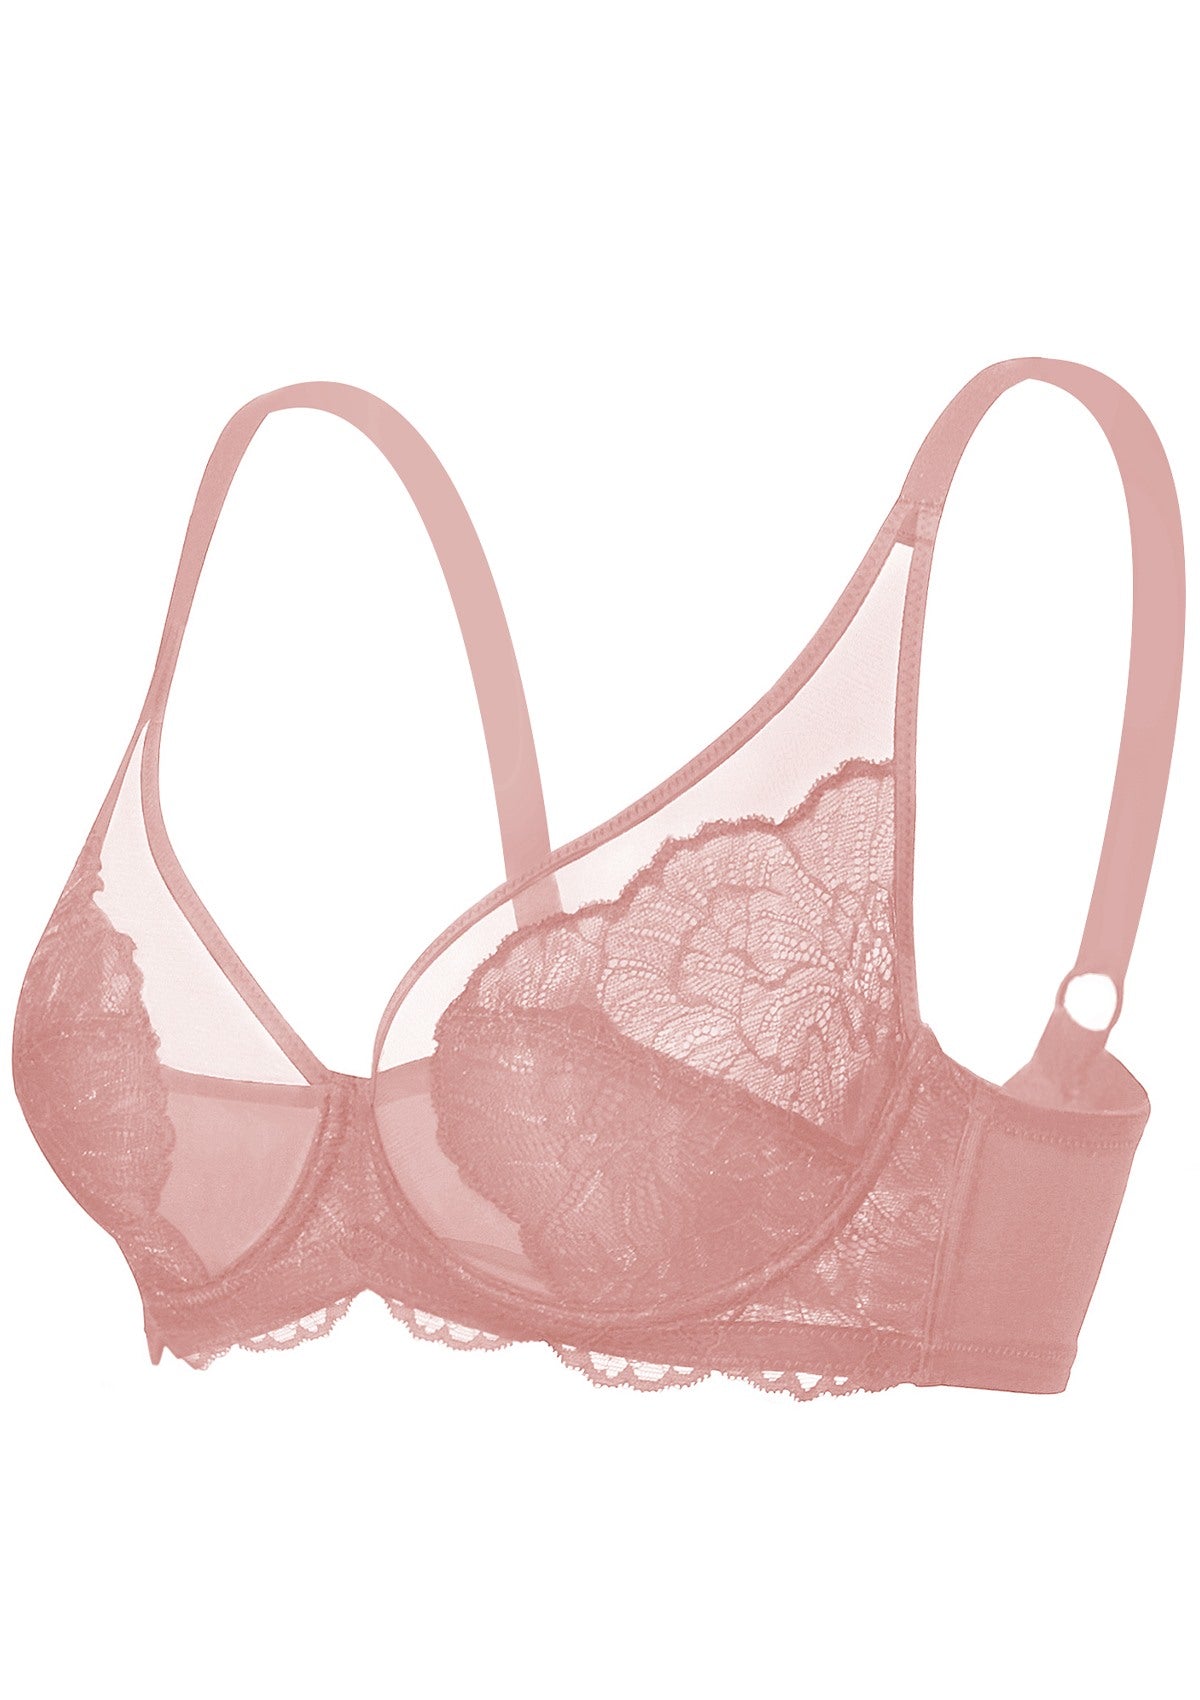 HSIA Blossom Unlined Lace Underwire Bra - Burgundy / 42 / C